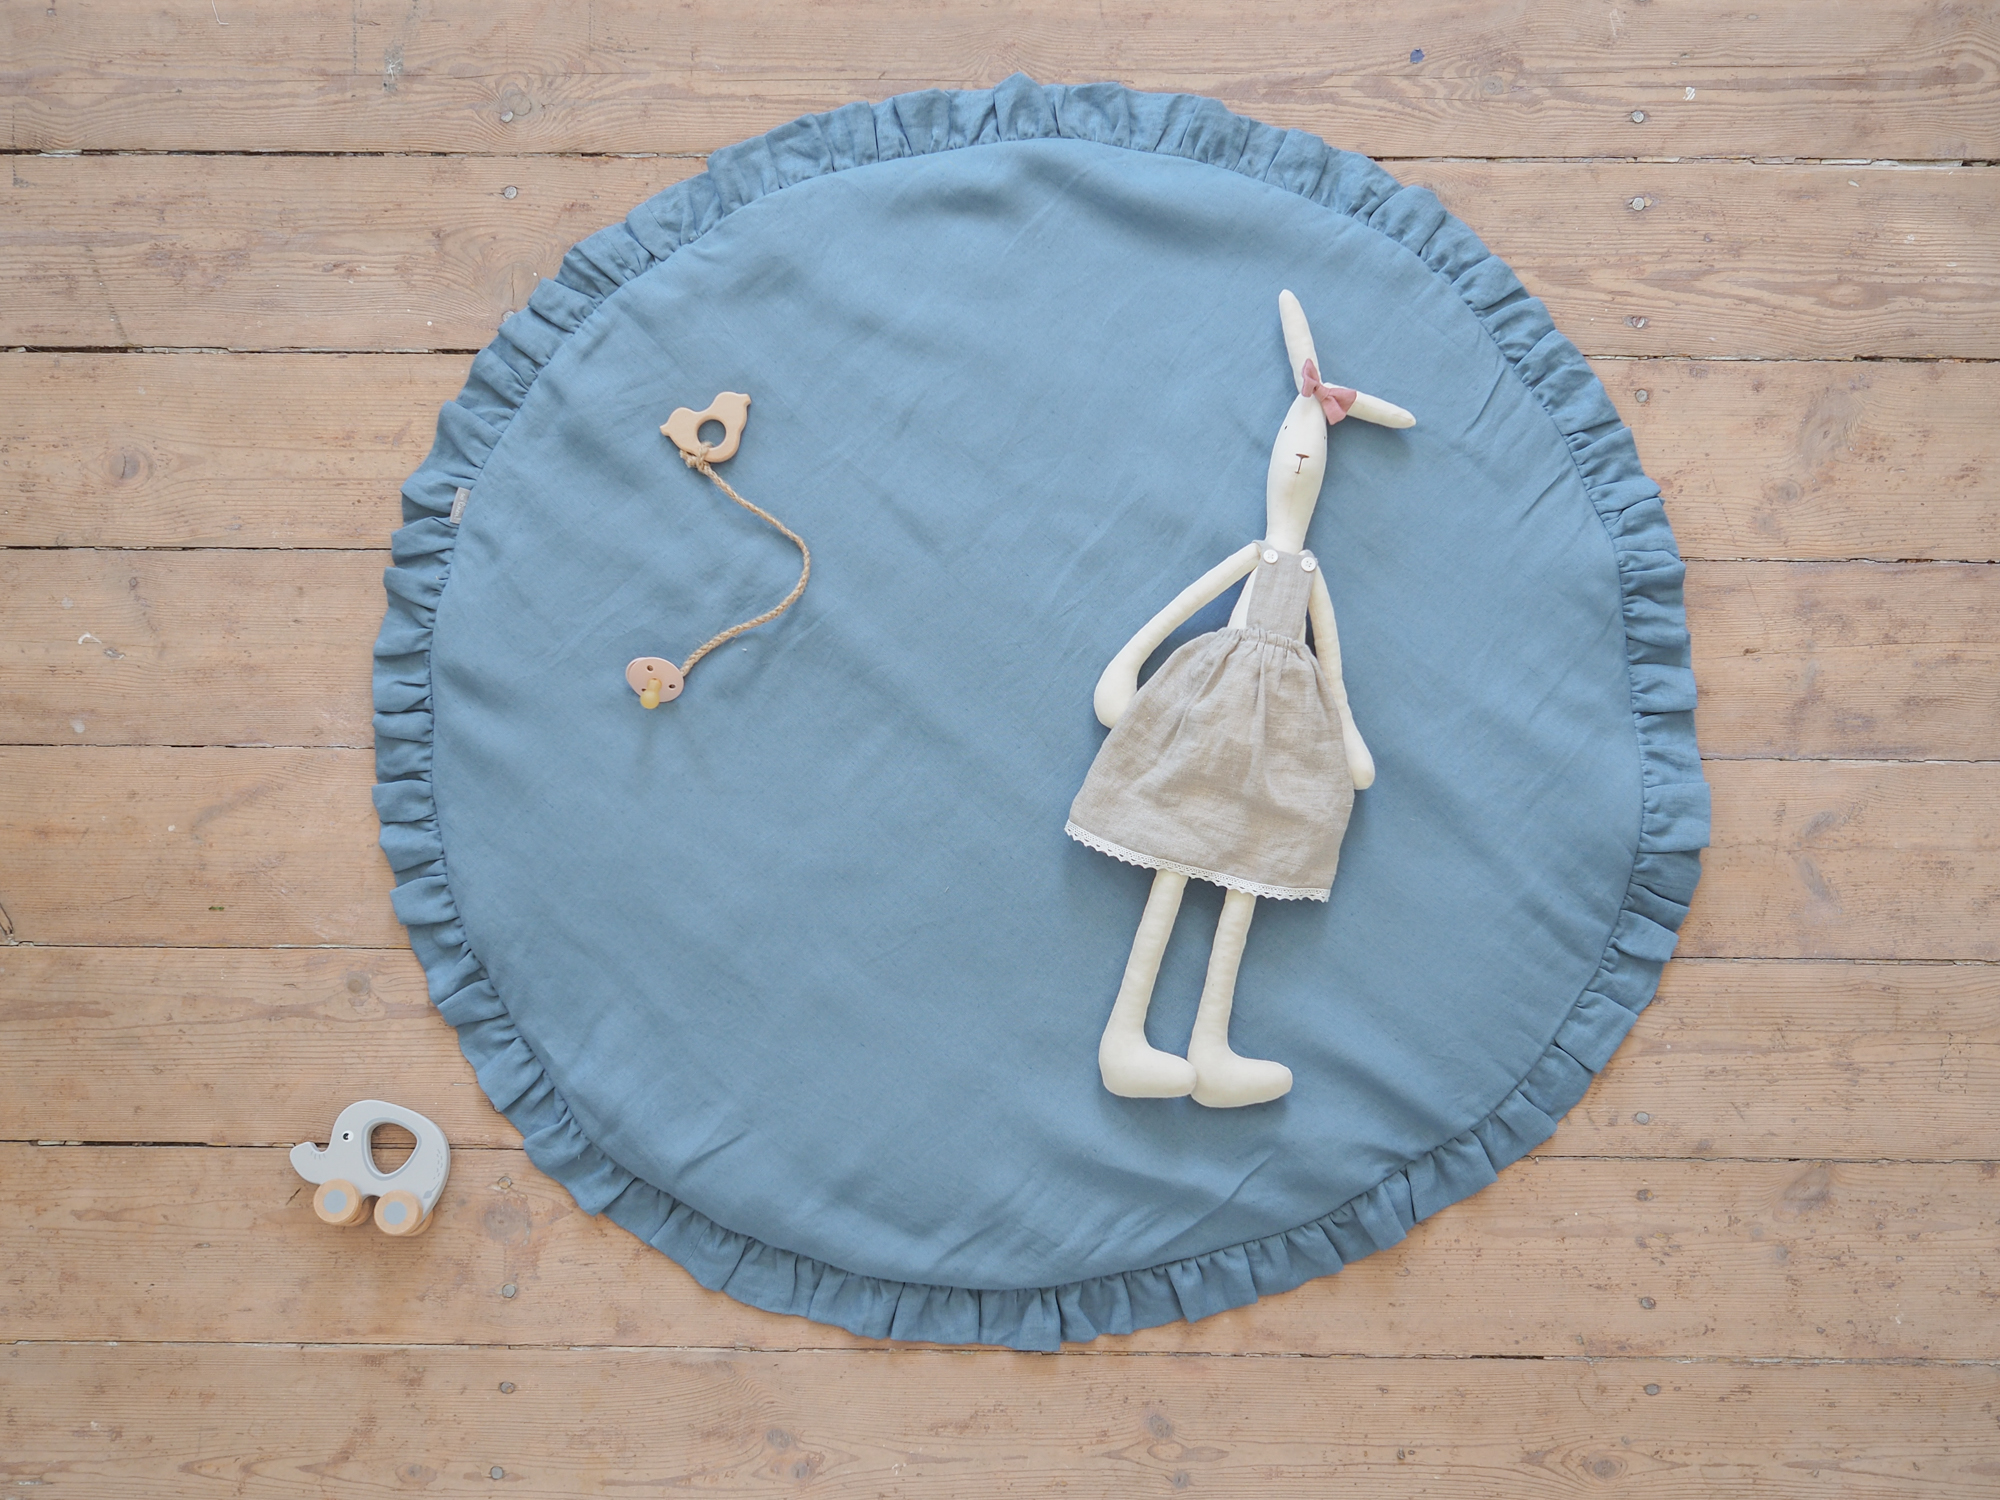 Round linen rug for a child